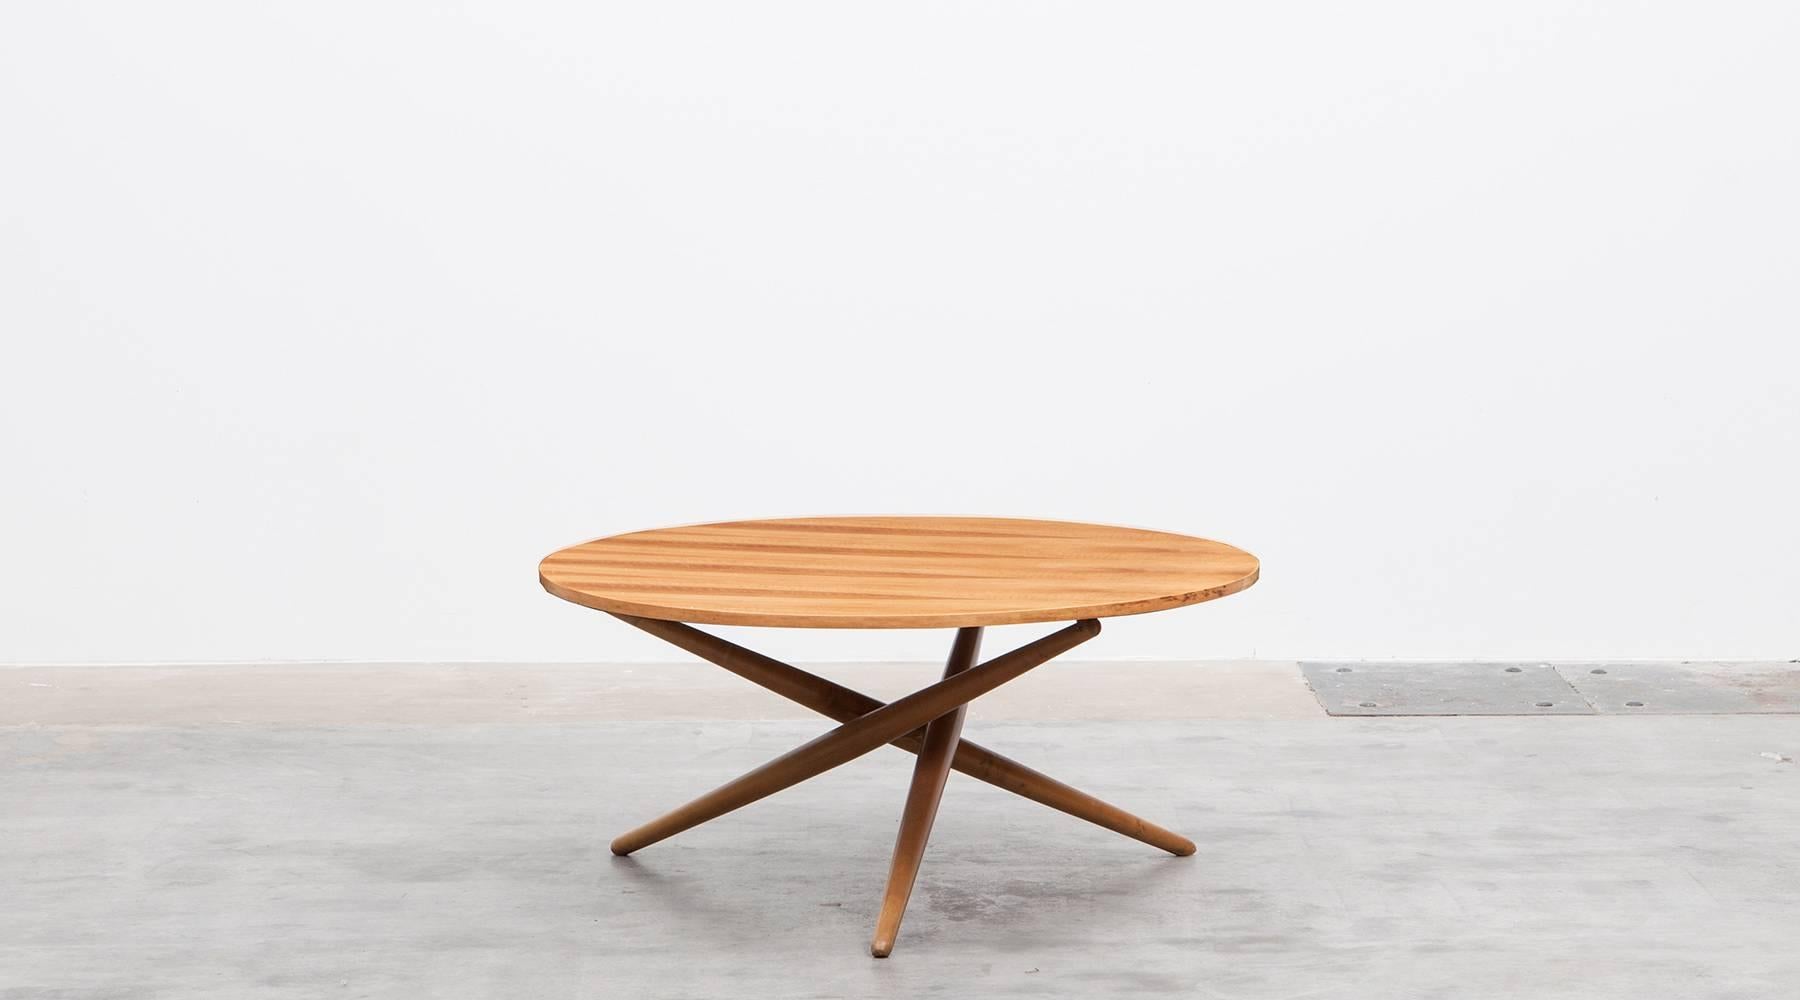 Eat and Tea Table with tabletop in teak by Jürg Bally, Switzerland, 1951.

Eat and tea table designed by Jürg Bally comes with a tabletop in teak on three wooden legs. This model strongly reminds of a Side Table by US designer T.H. Robsjohn-Gibbings